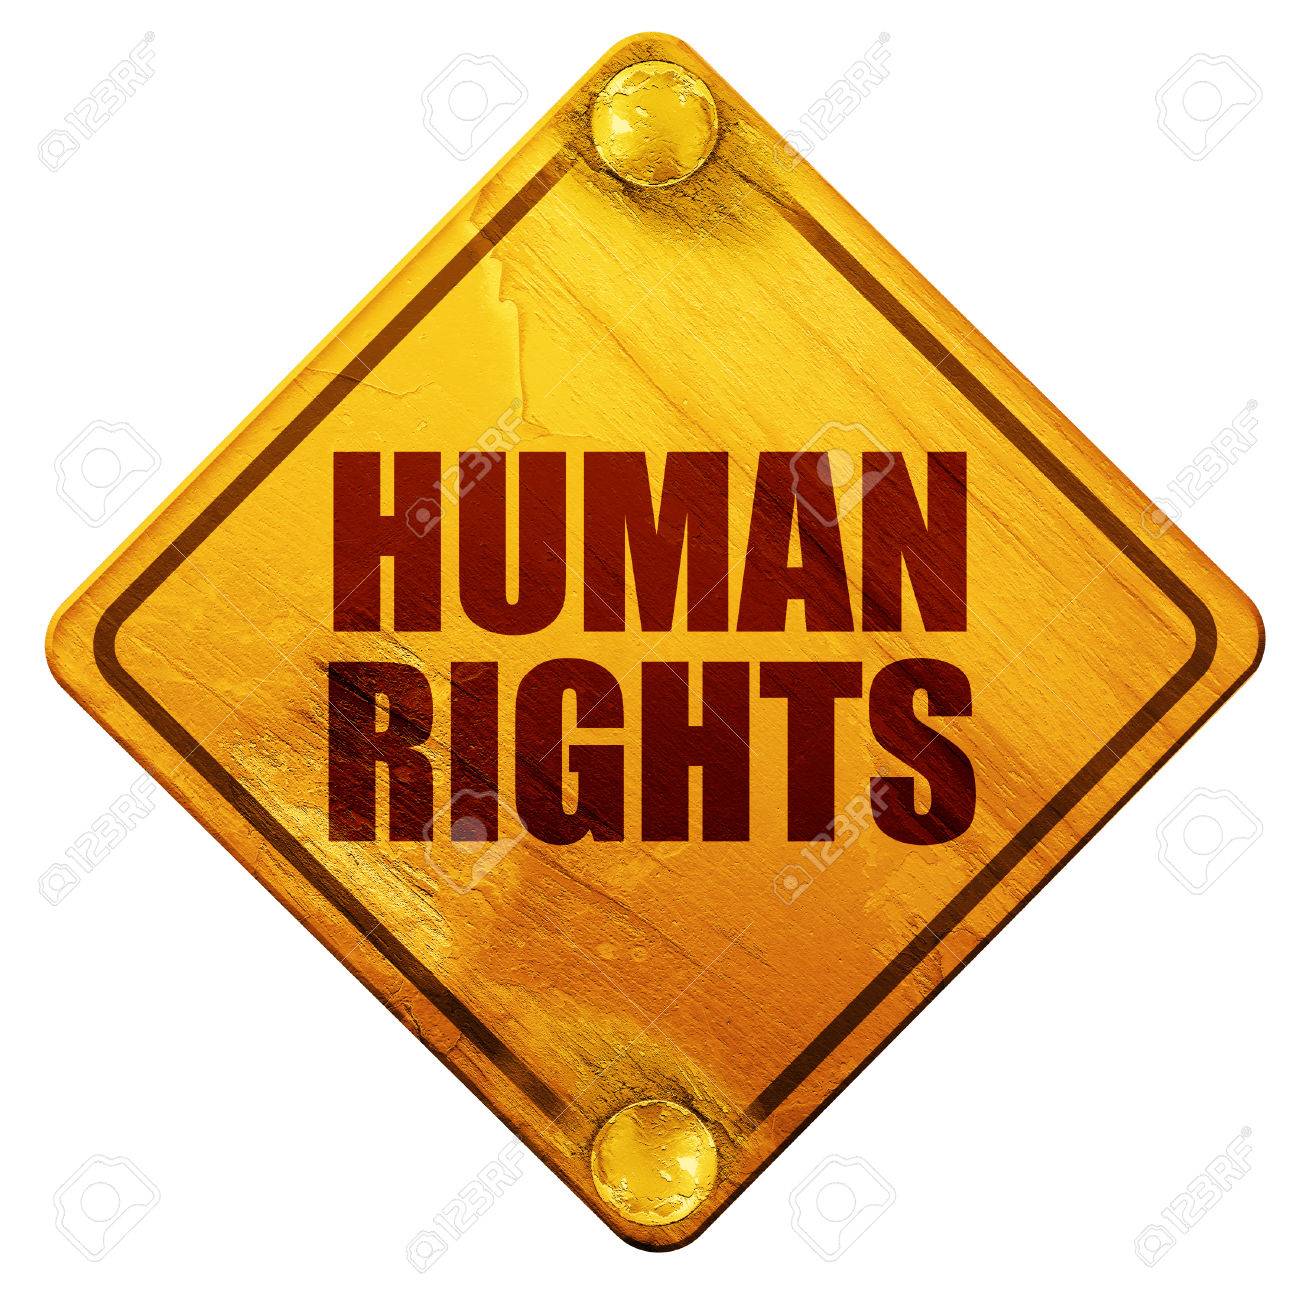 Human Rights 3d Rendering Yellow Road Sign On A White Background